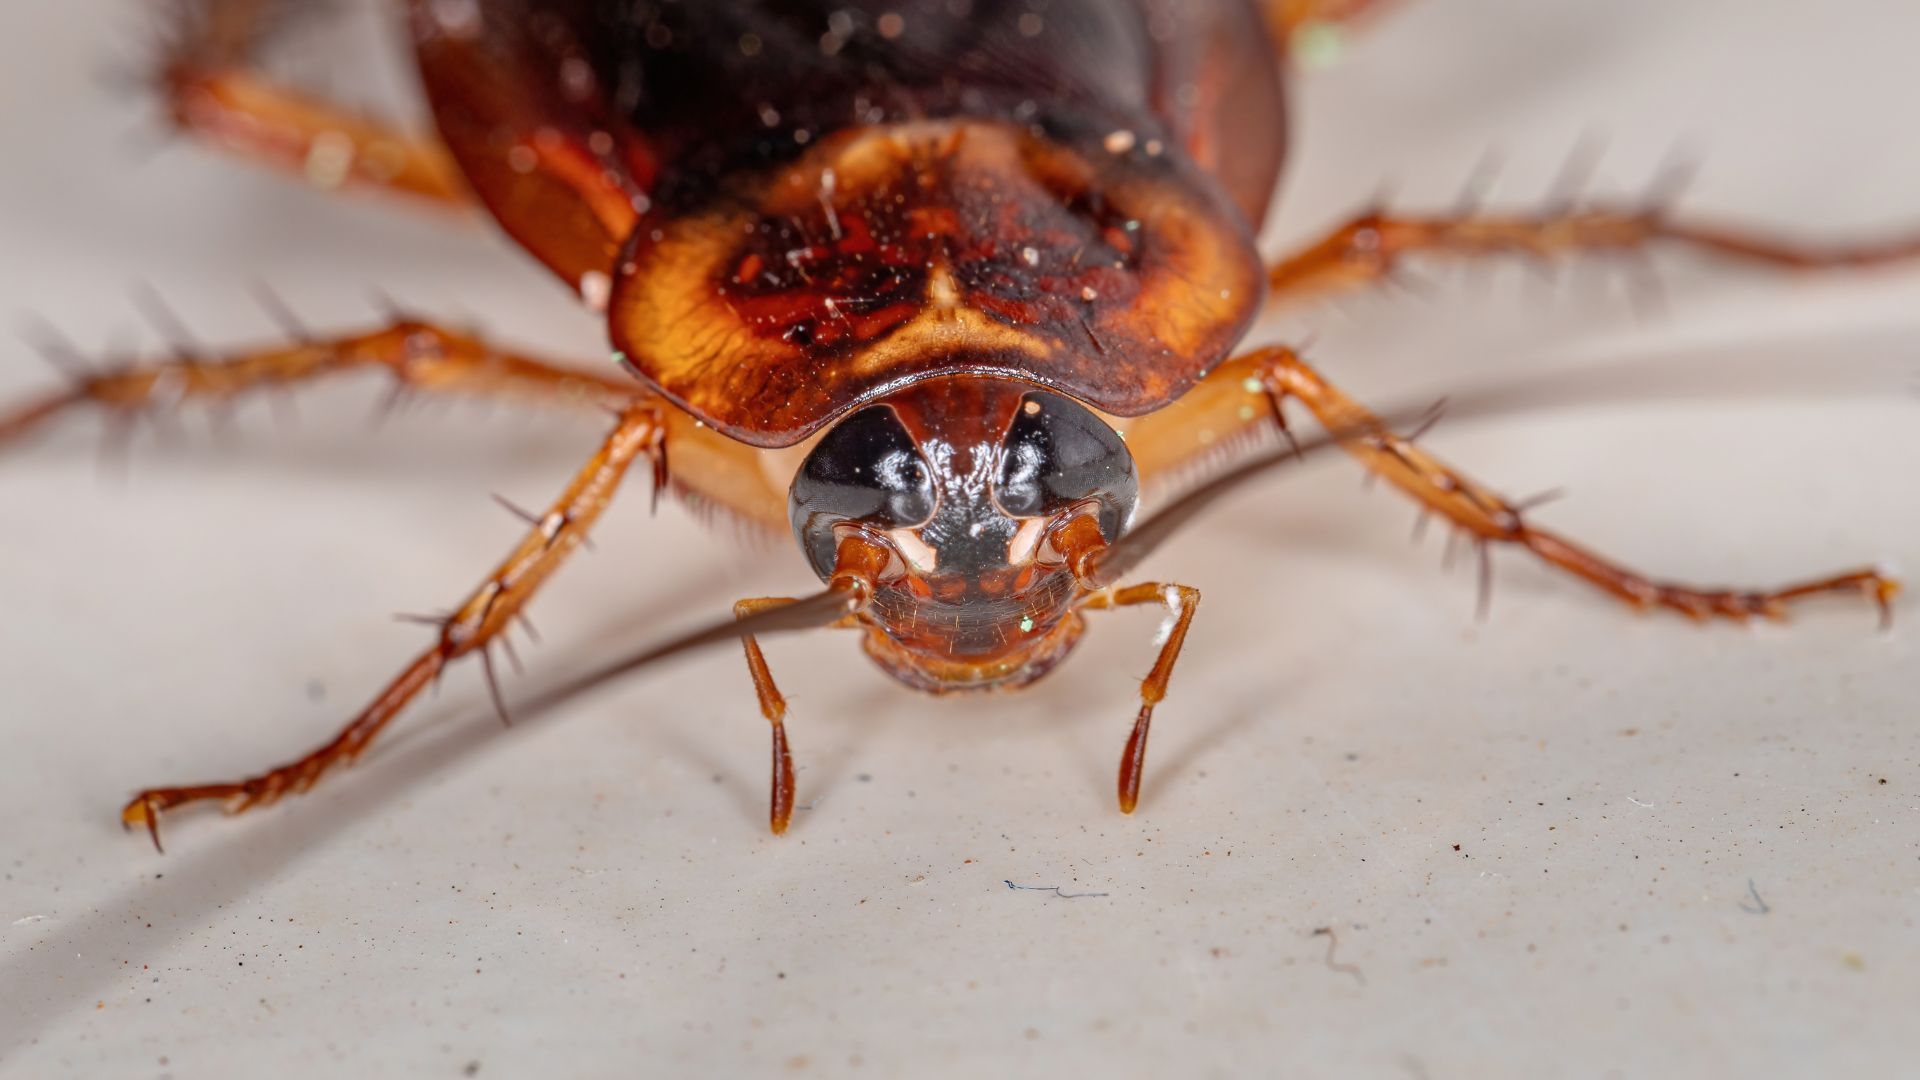 An close-up image of the head of an American cockroach.